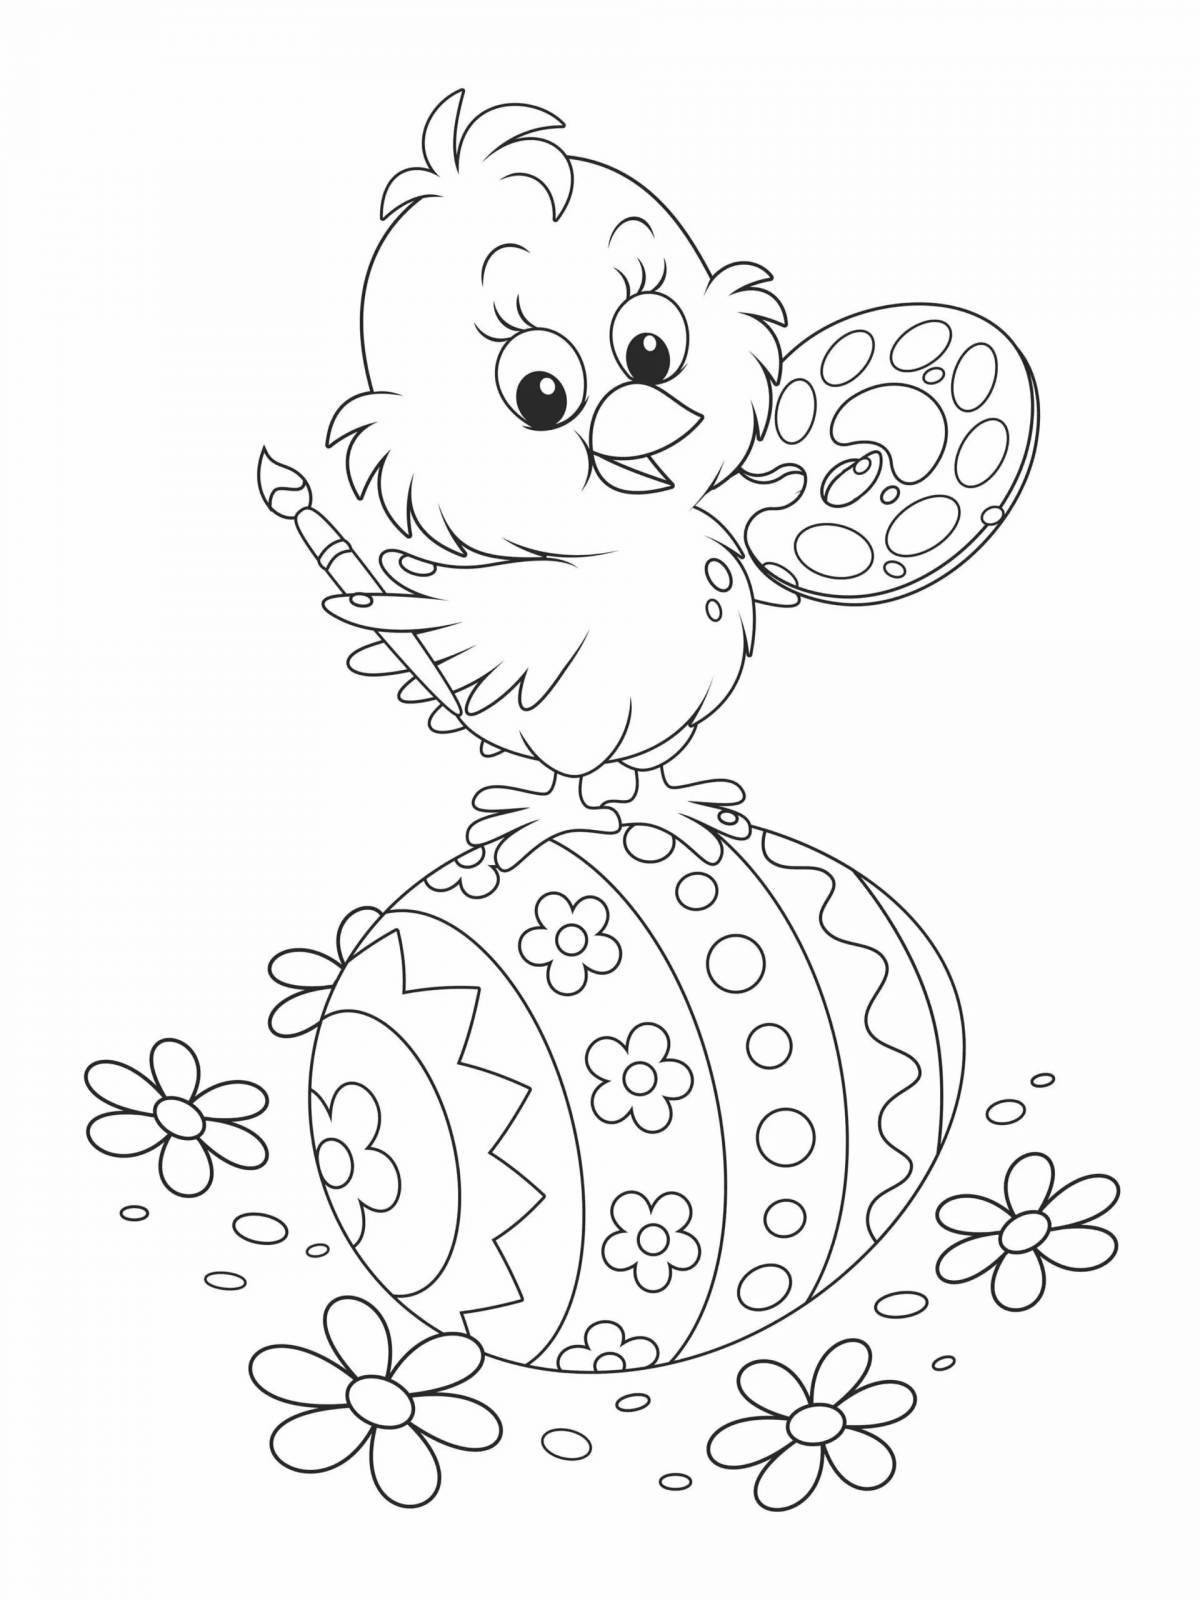 Adorable chick in egg coloring page